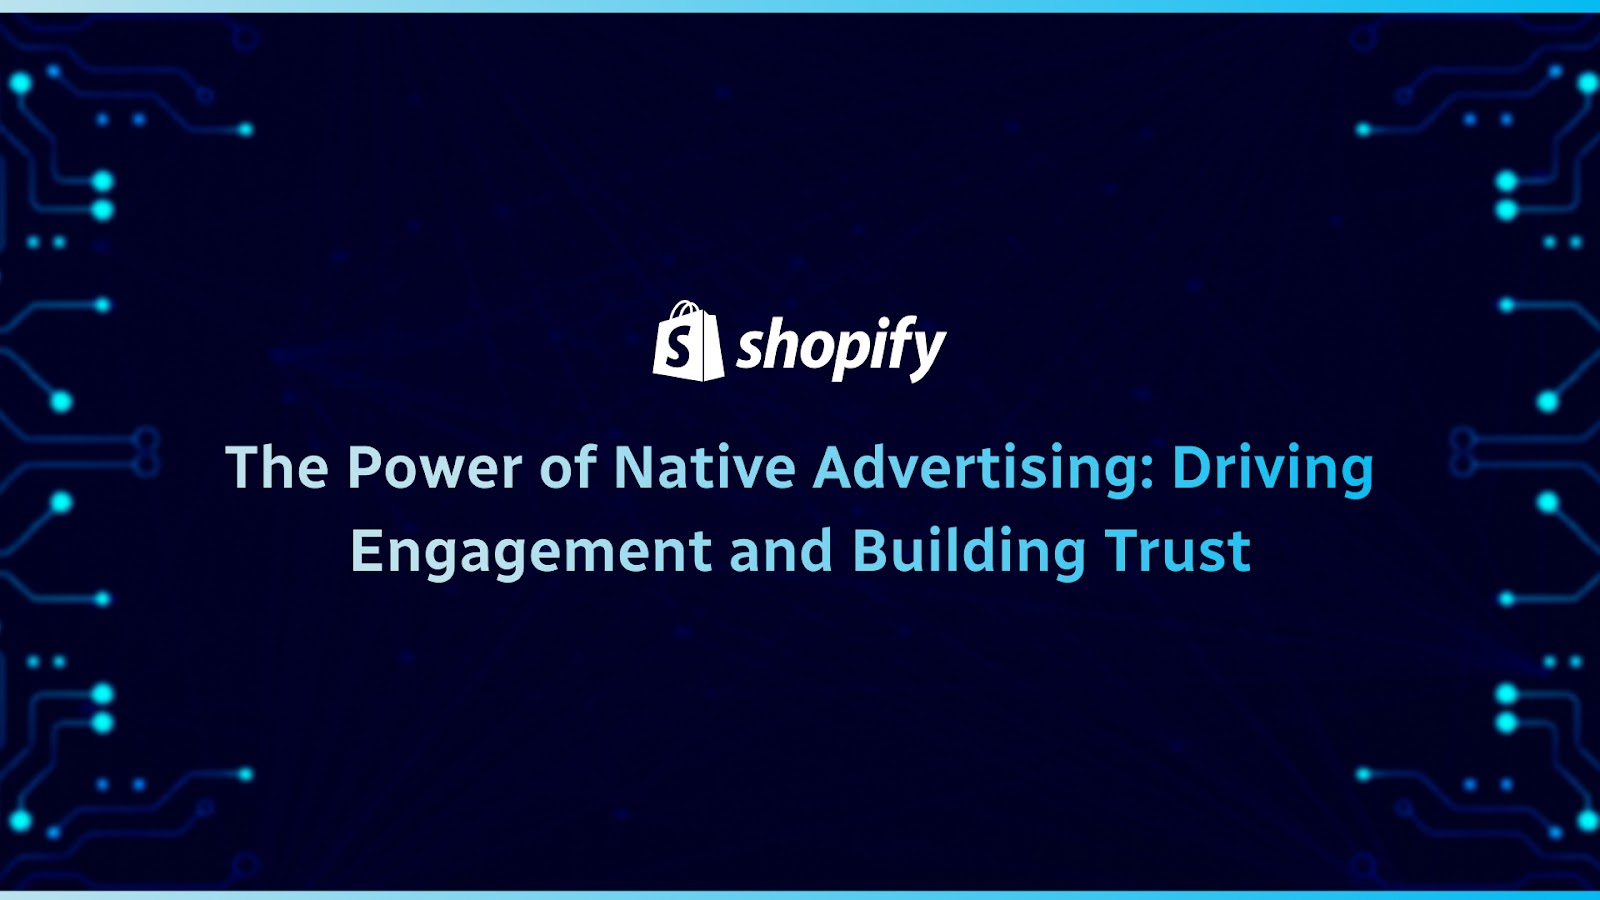 The Power of Native Advertising: Driving Engagement and Building Trust